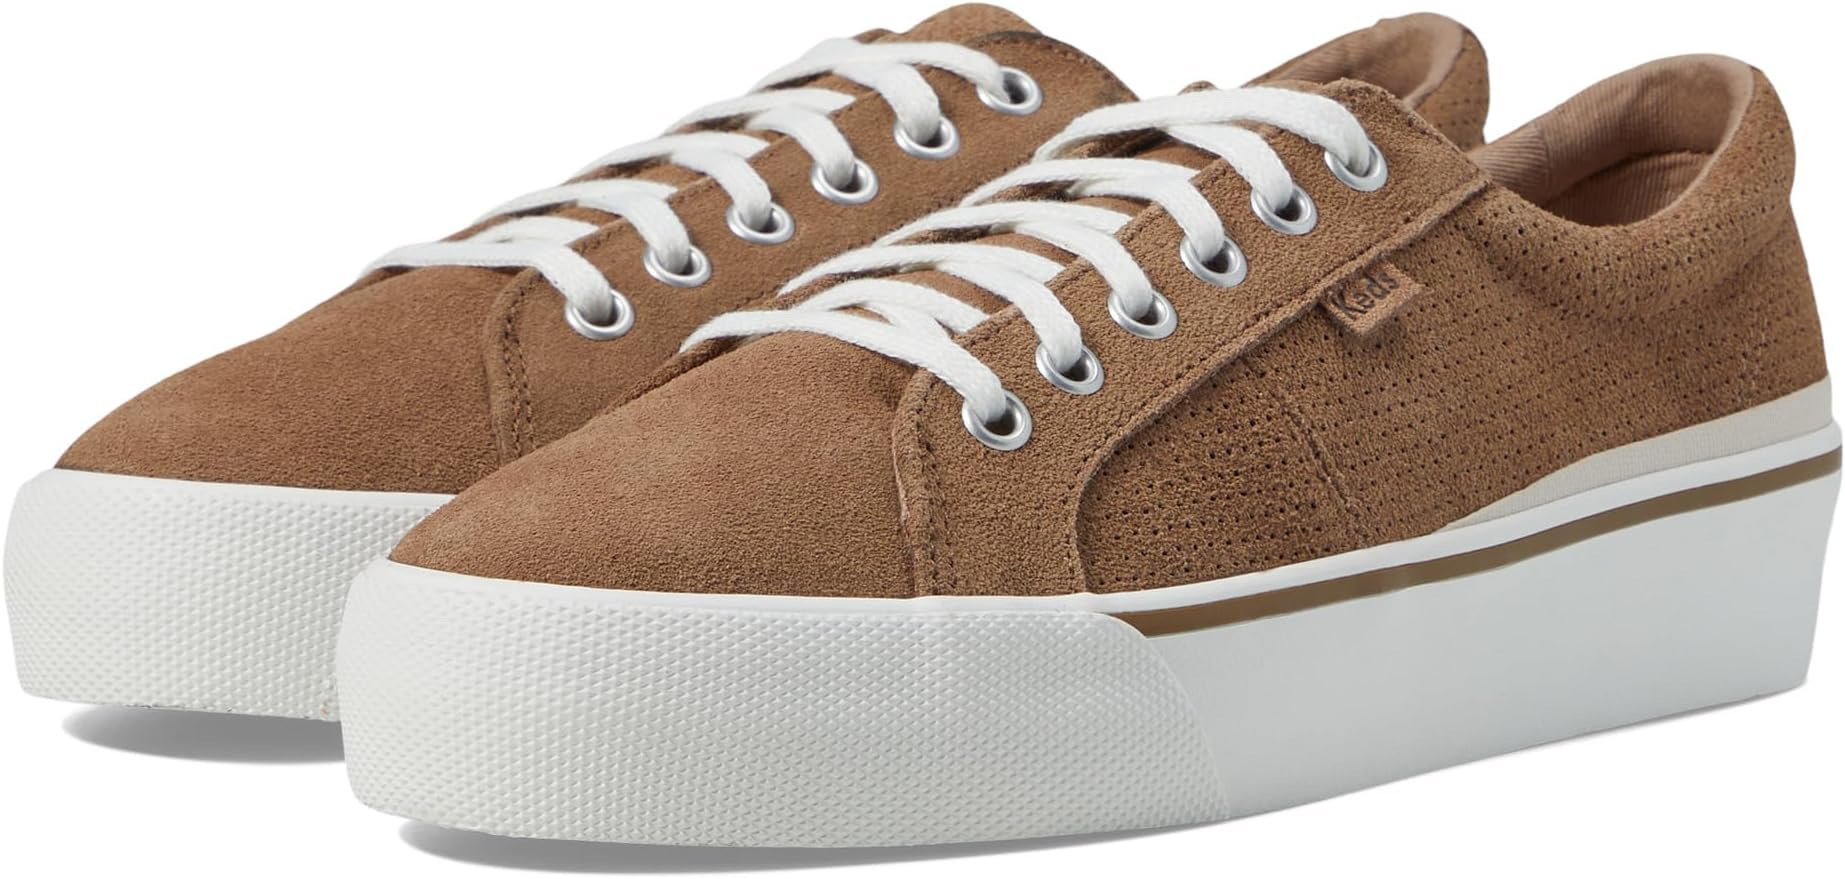 Кроссовки Jump Kick Duo Lace-Up Keds, цвет Taupe Perf Suede п pe cosa nost night bl int perf 100 м 076003